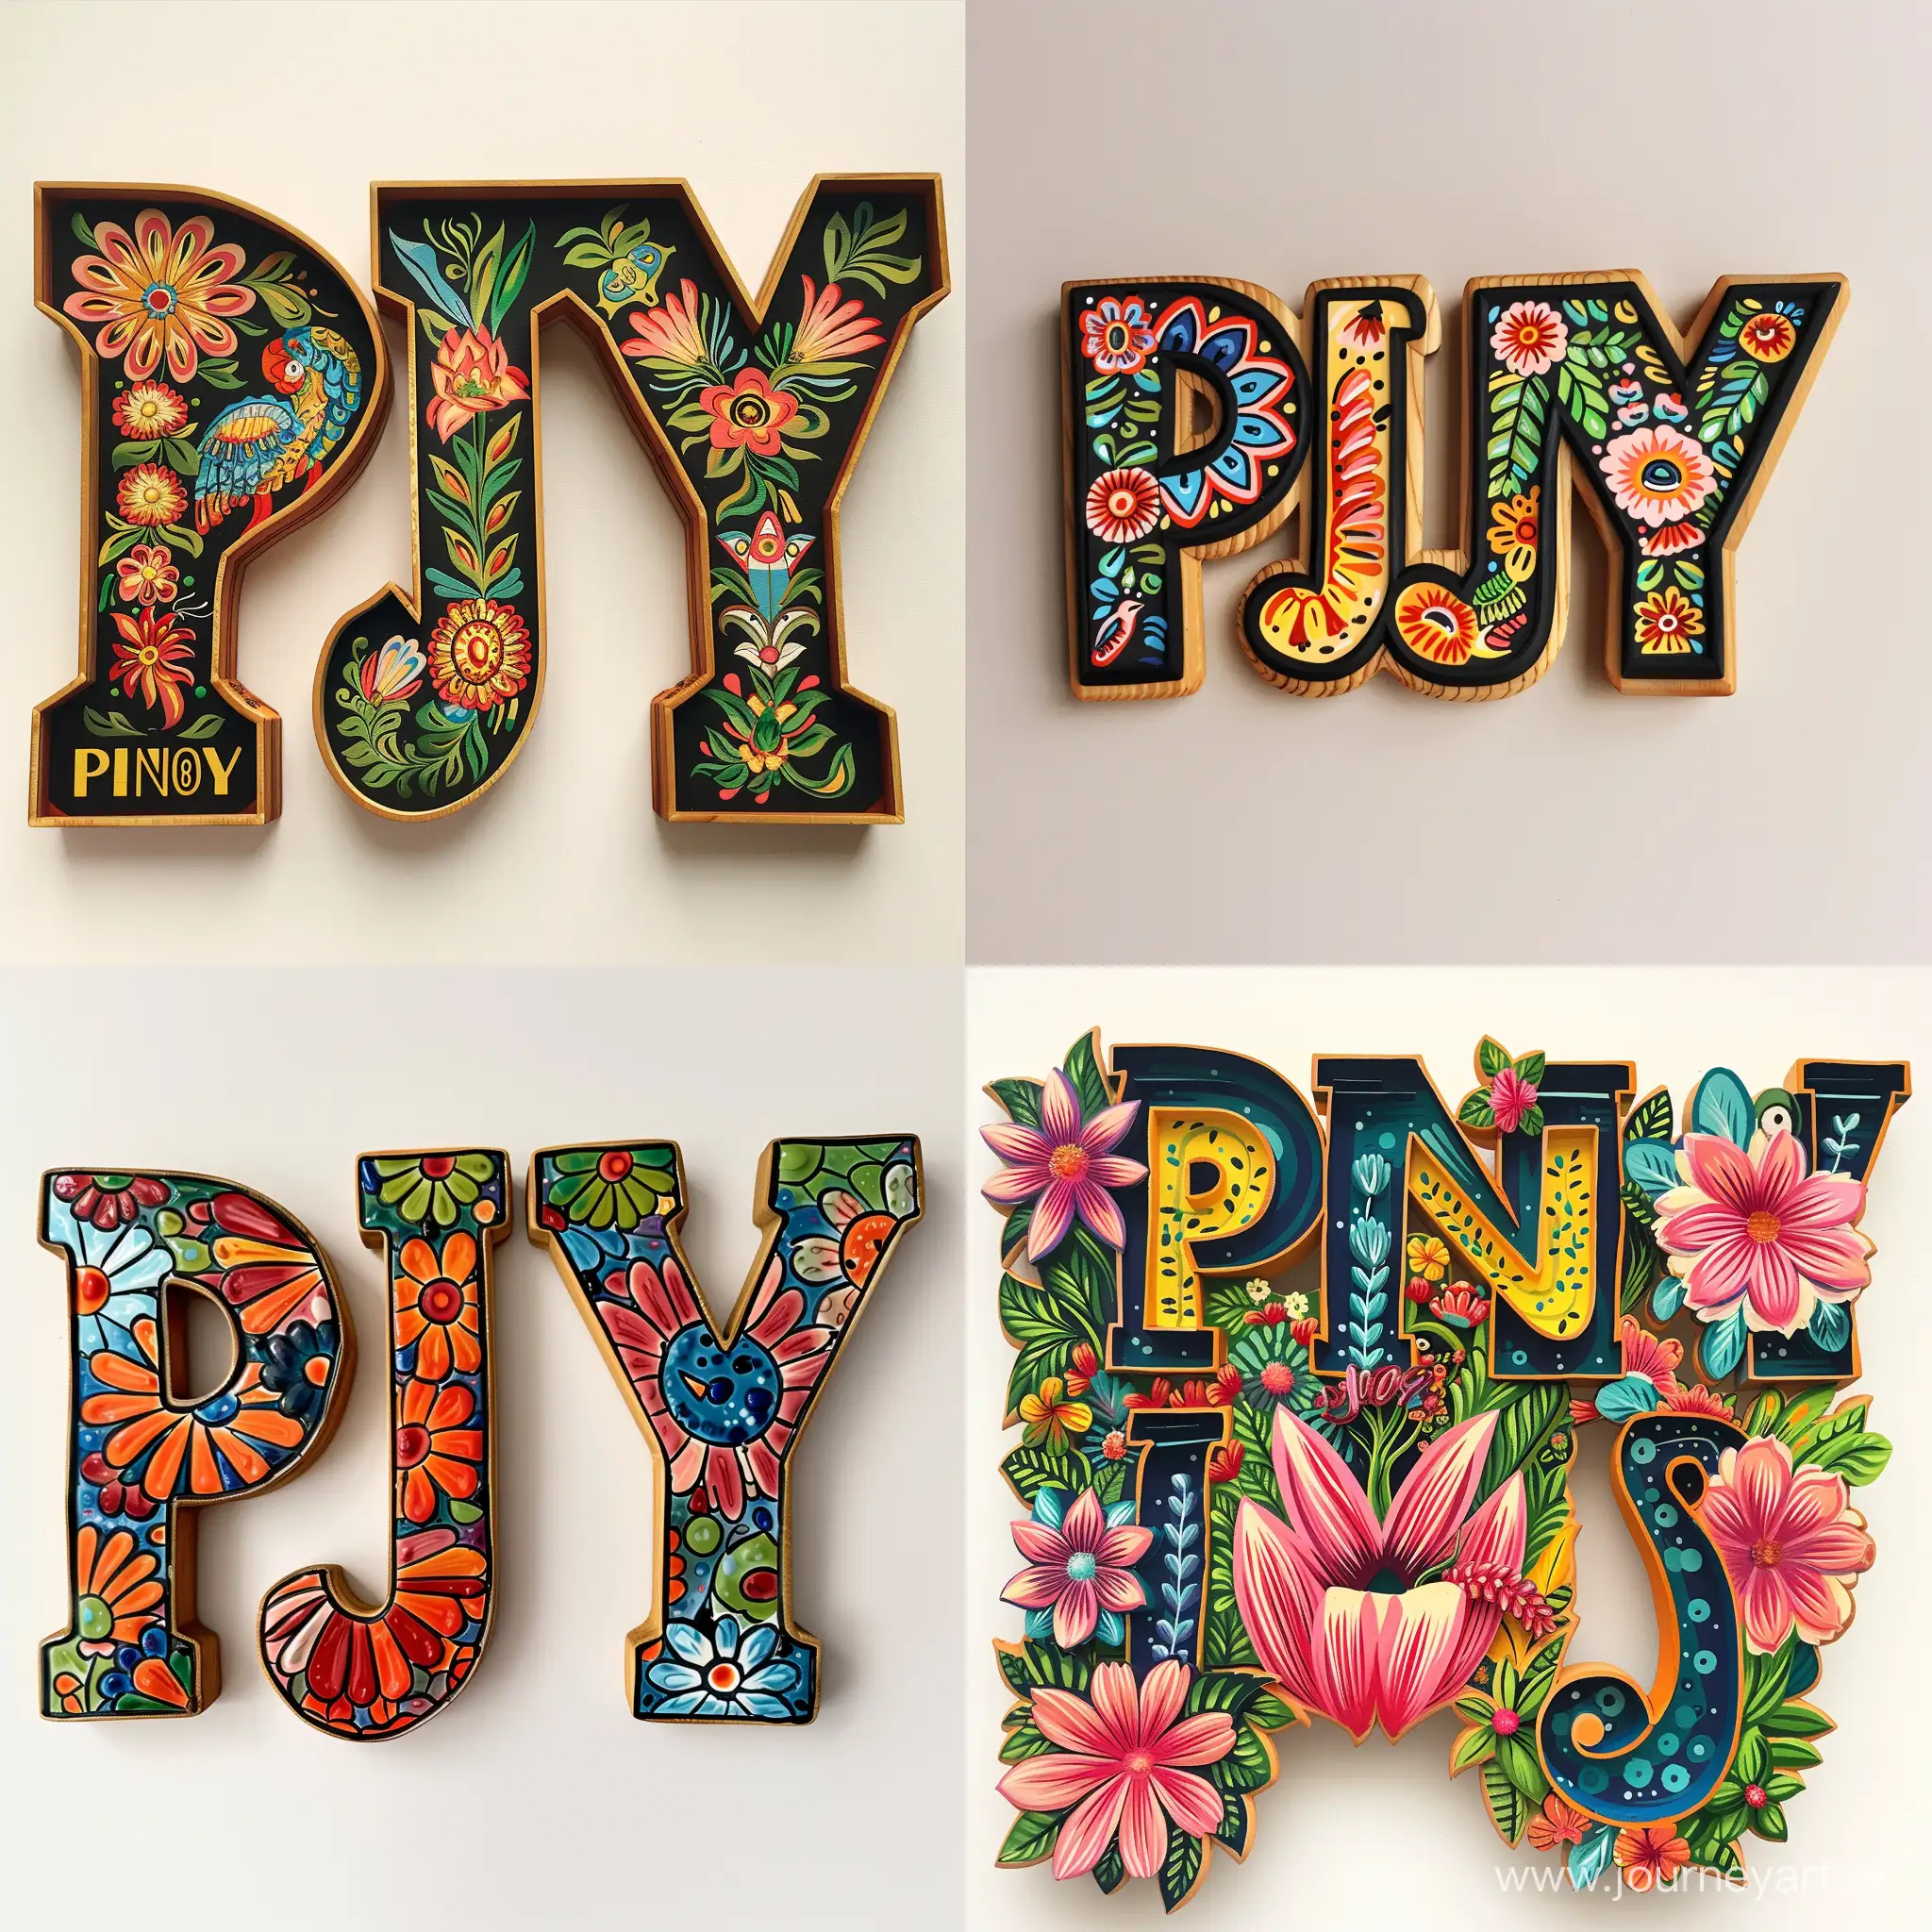 Vibrant-Mexican-PINJOY-Letters-Display